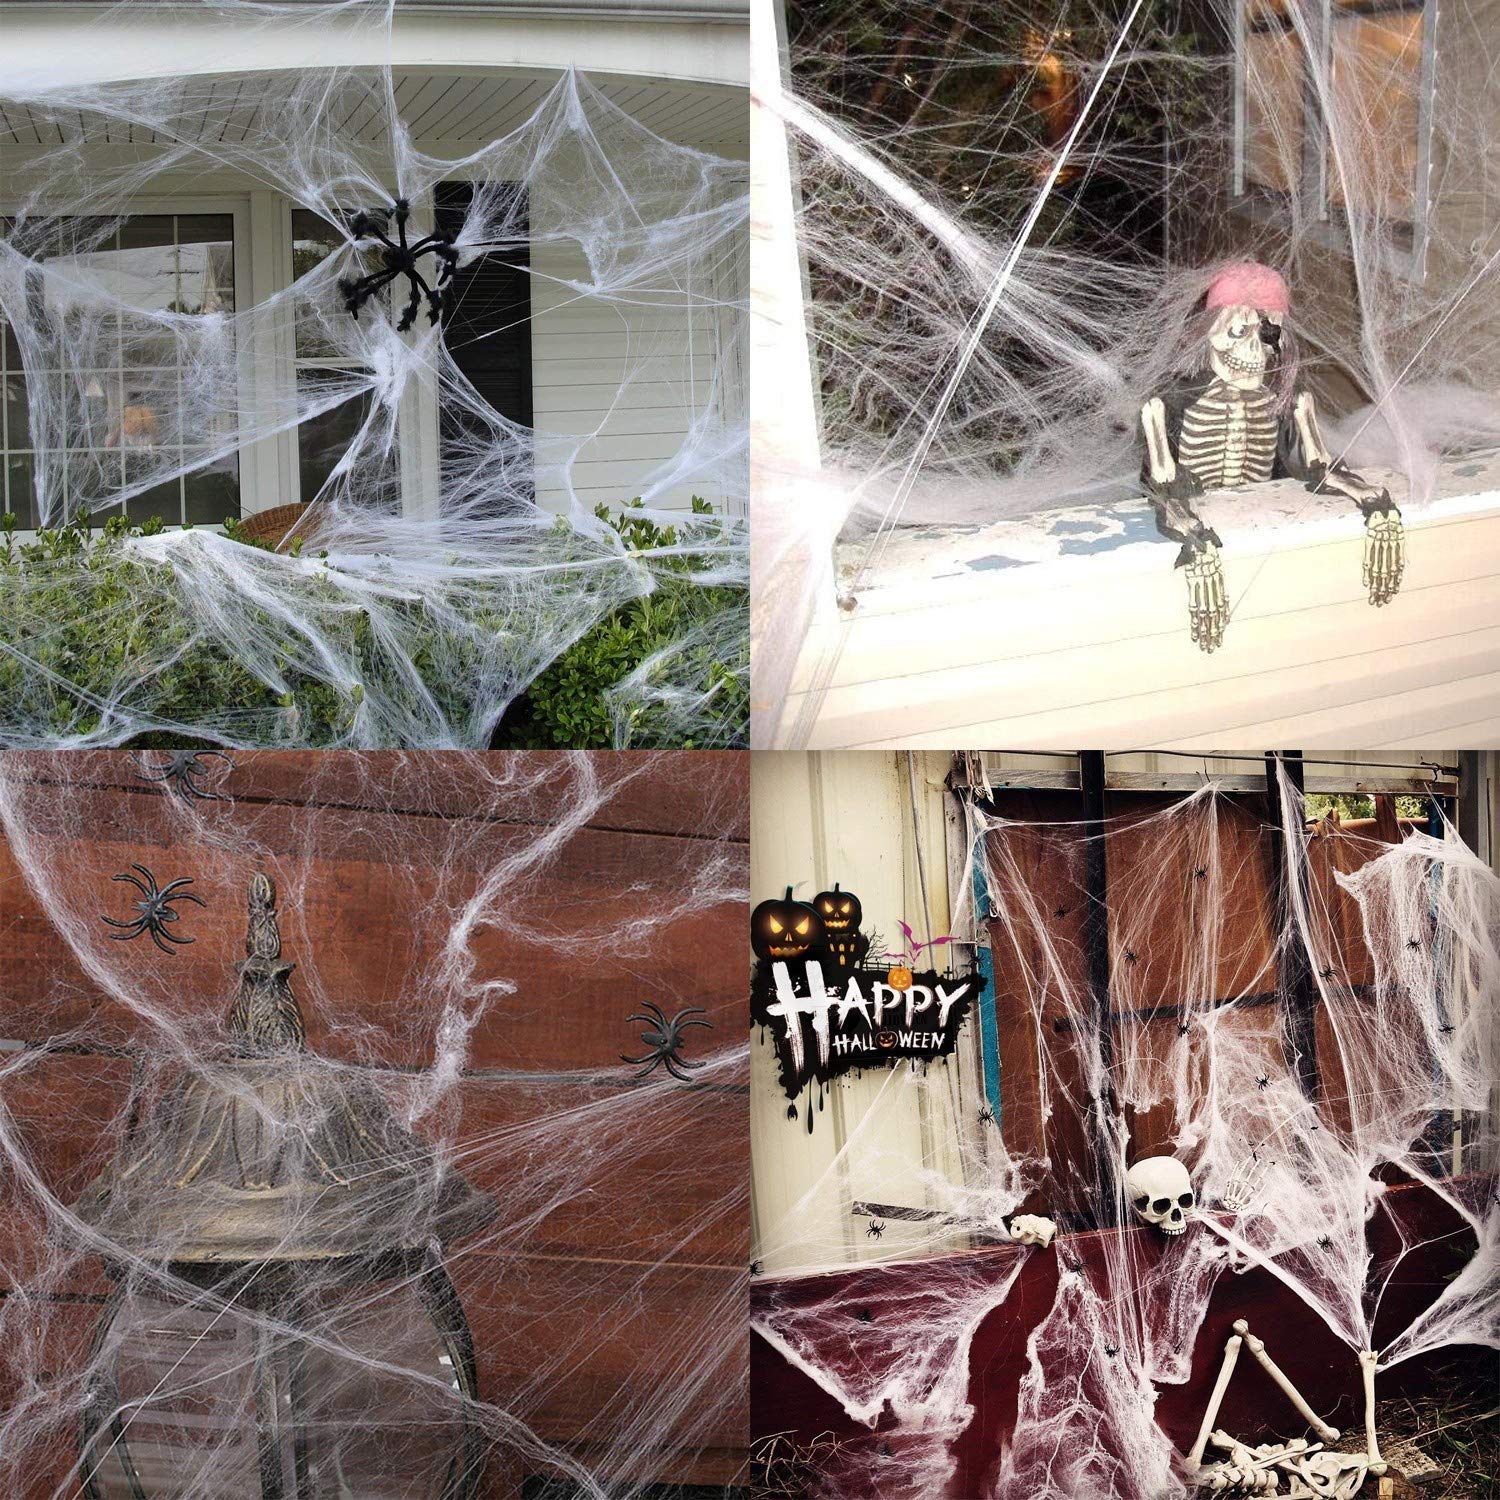 1000 sqft Spider Webs Halloween Decorations Bonus with 77 Fake Spiders, Super Stretch Cobwebs for Halloween Indoor and Outdoor Party Supplies